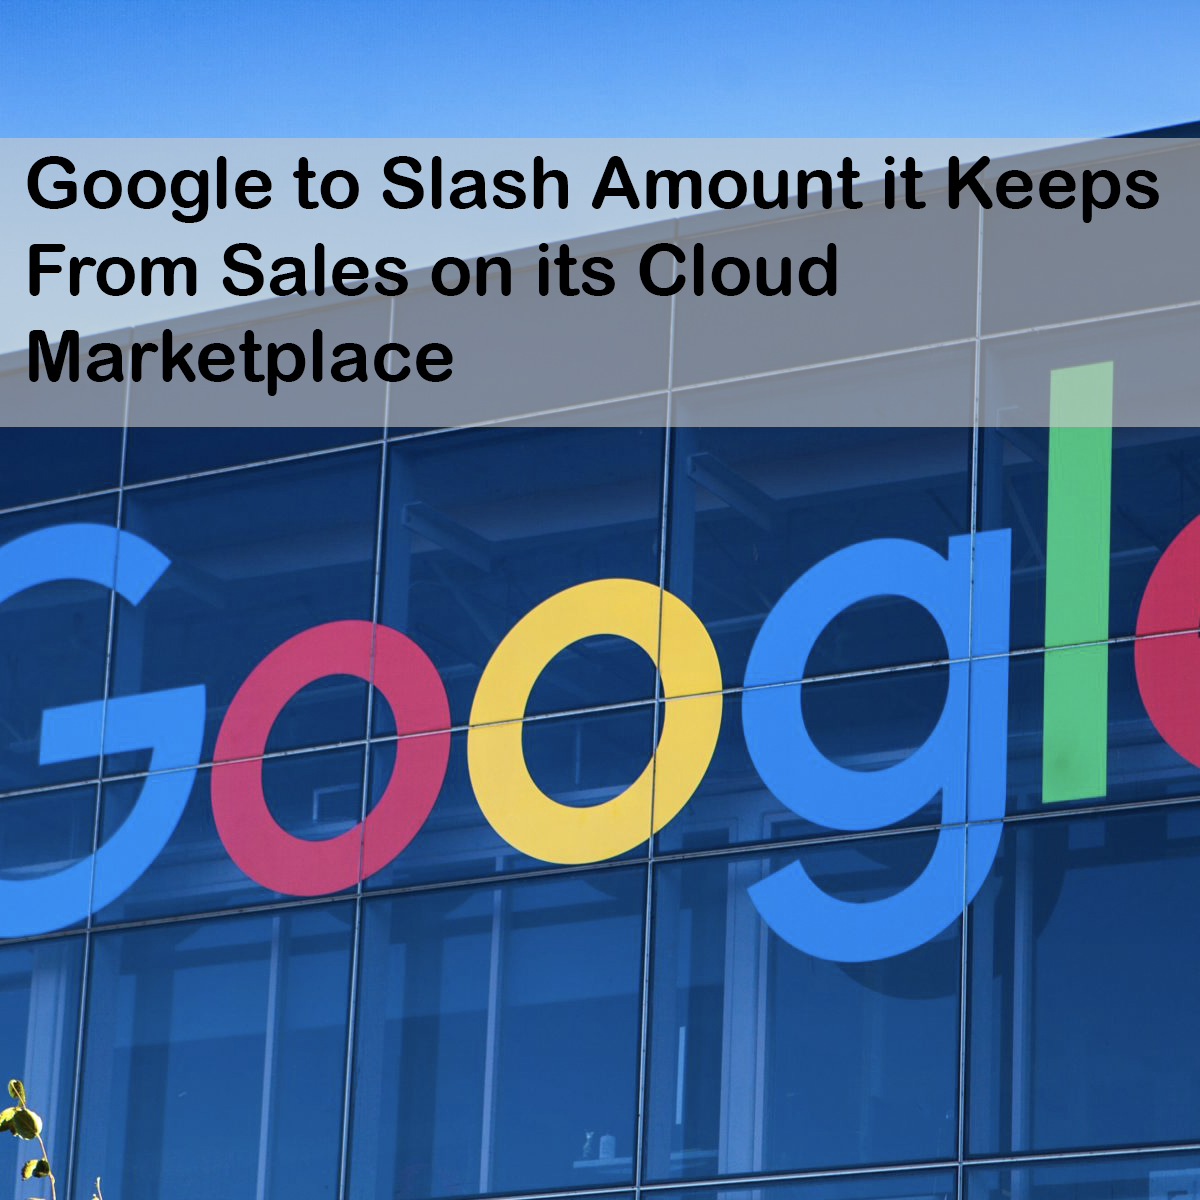 Google to Slash Amount it Keeps From Sales on its Cloud Marketplace